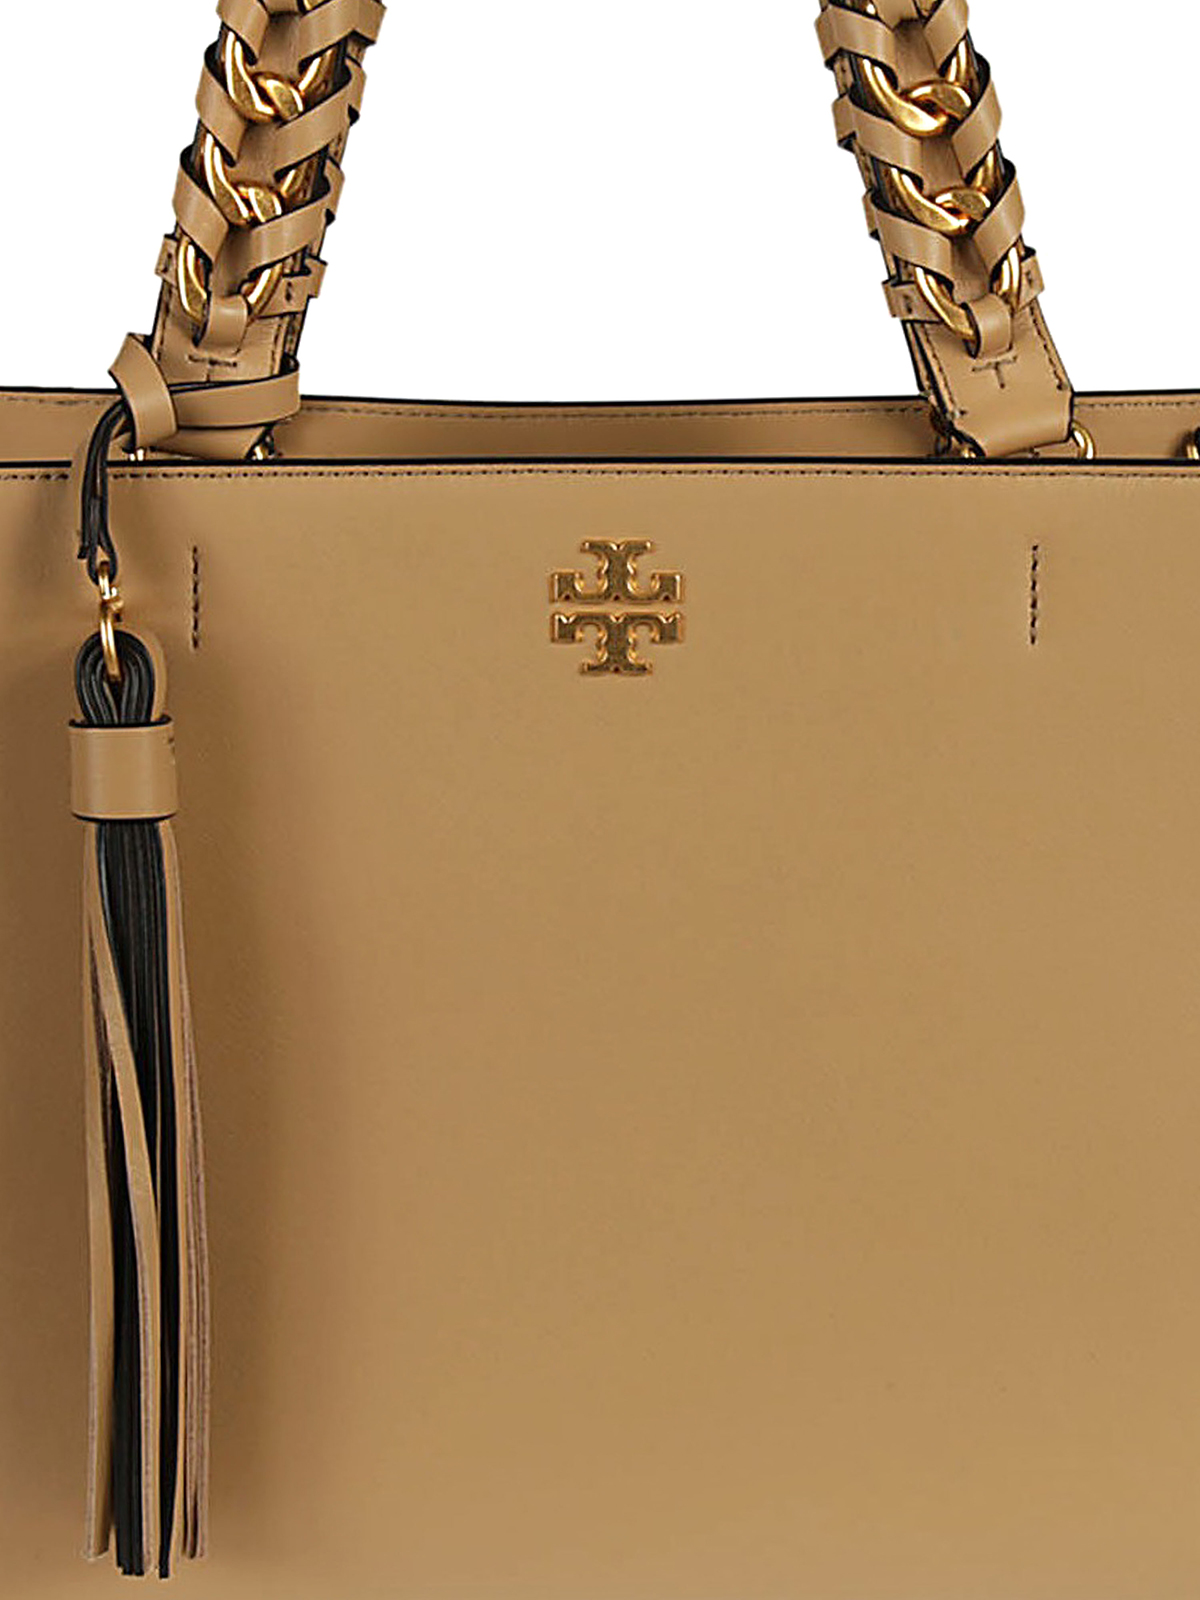 Totes bags Tory Burch - Brooke leather satchel - 43652255 